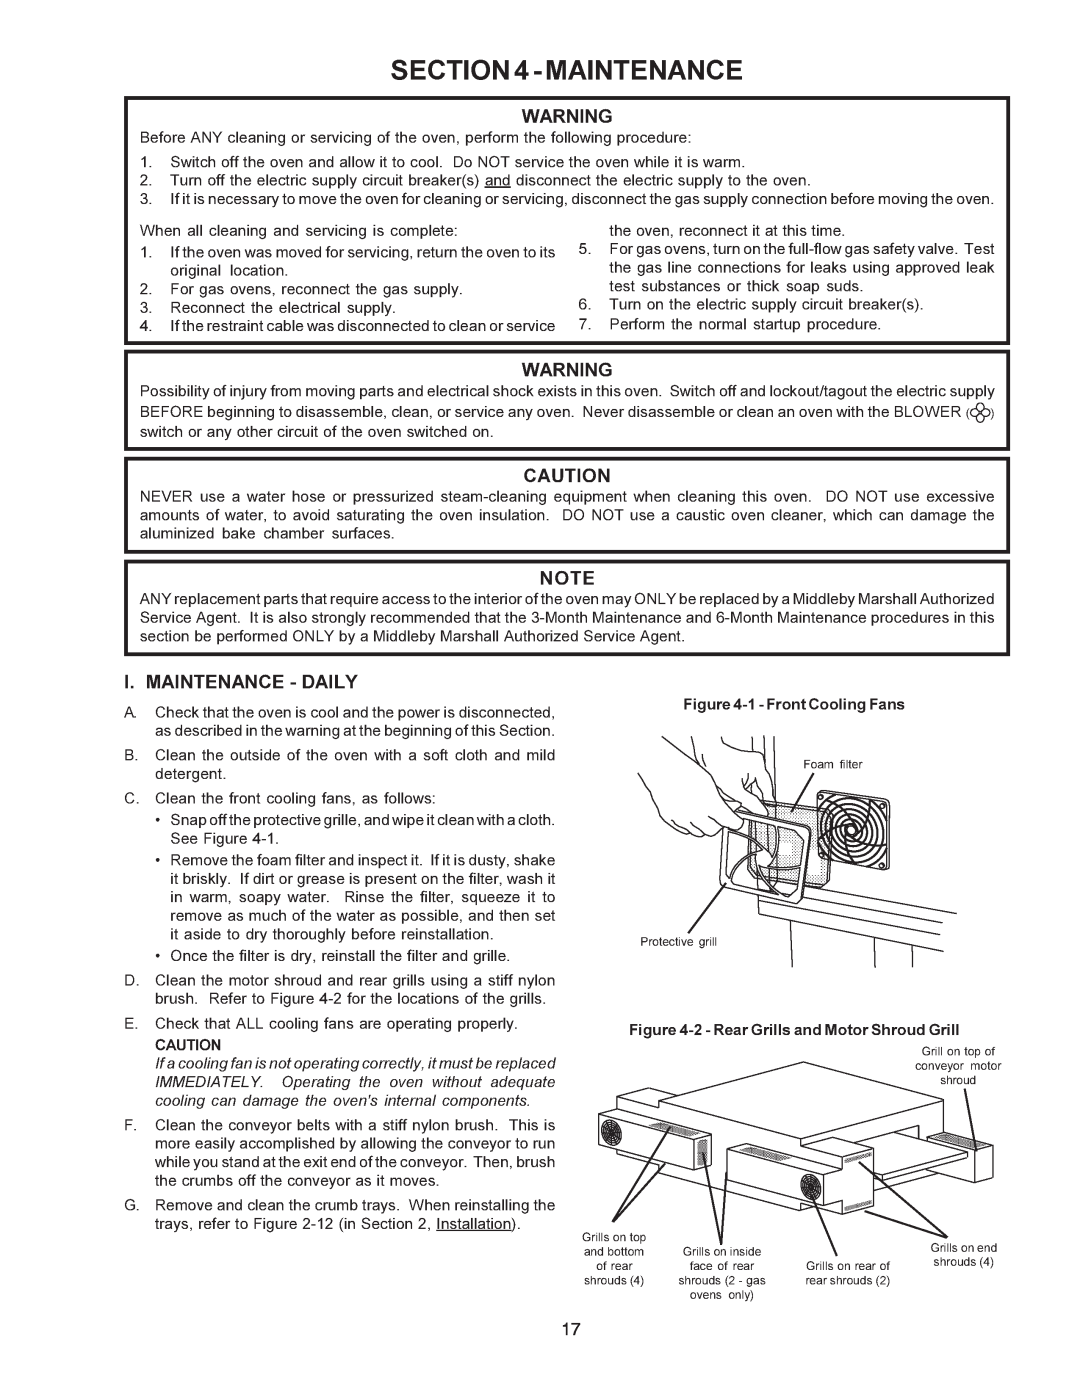 Middleby Marshall PS670 installation manual 